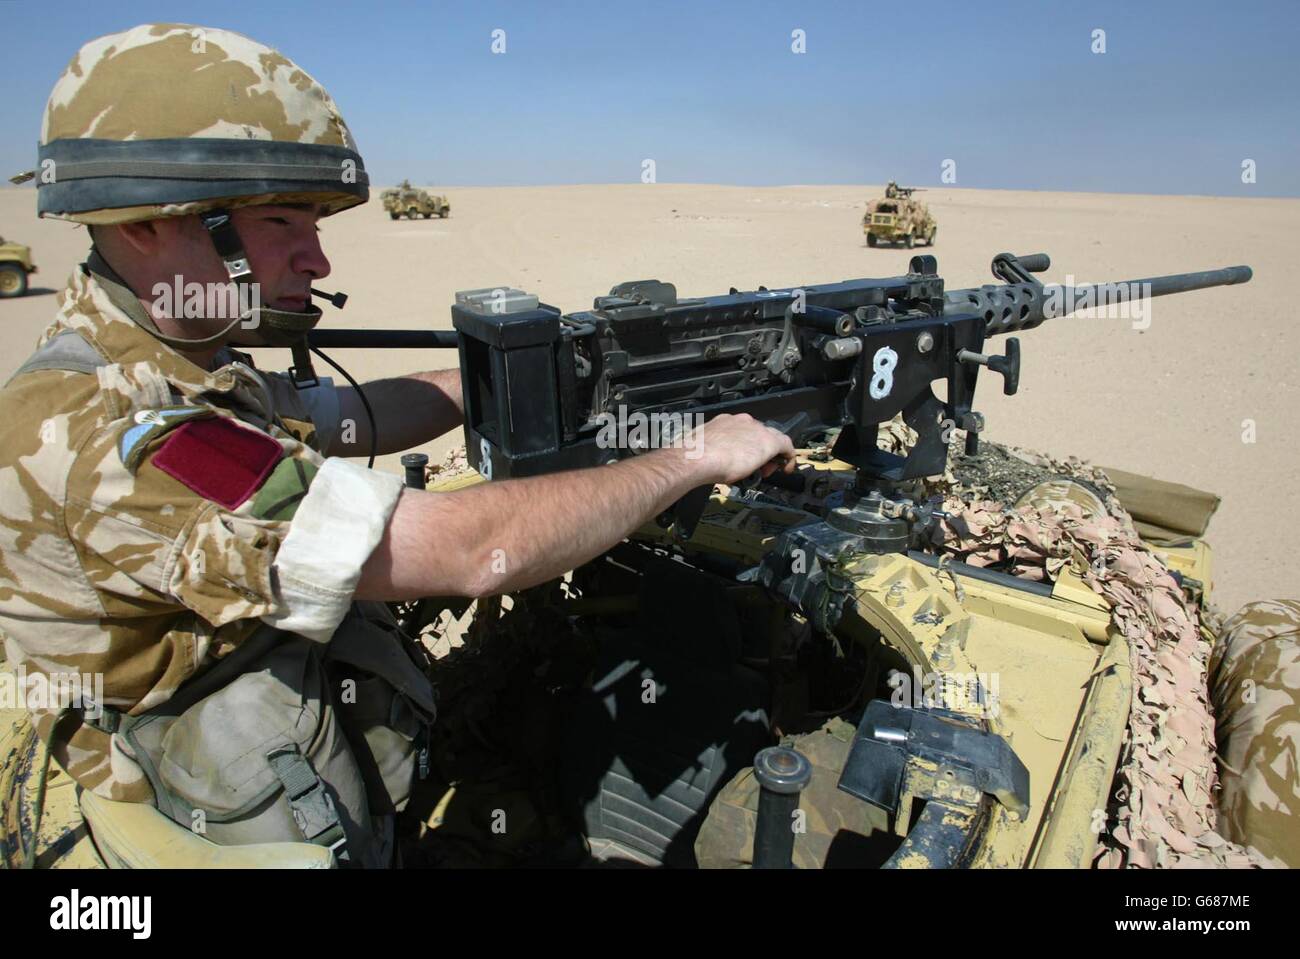 The mobile support group of the 1st Battalion The Parachute Regiment leave their base at Concentration Area Eagle Camp 2 for exercises in the Kuwaiti desert in their WMIK Land Rovers (Weapons Mount Instalation Kit) with 50 calibre machine guns mounted on top. Stock Photo